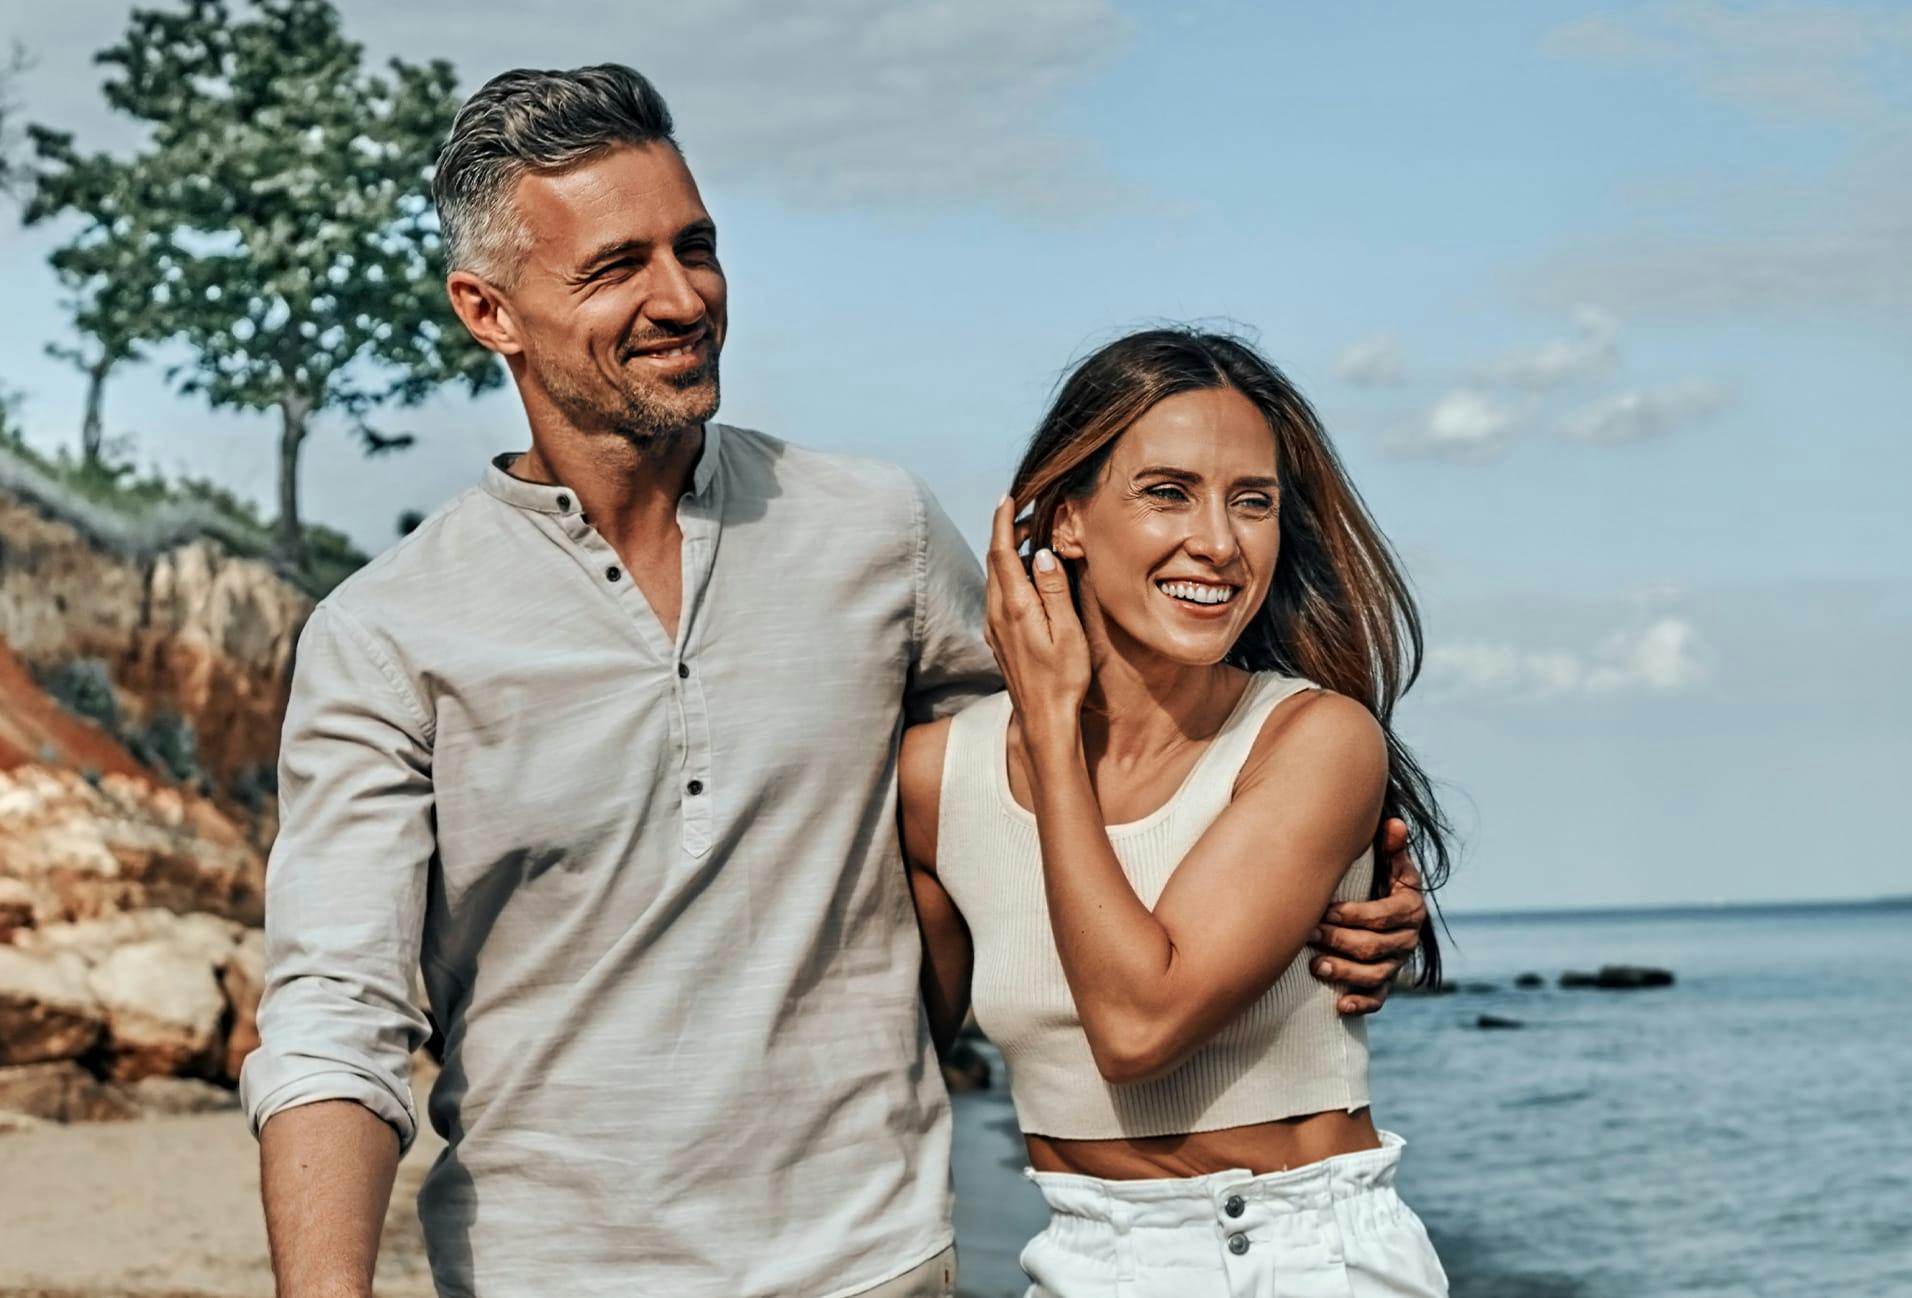 Man and woman smiling while walking by beach